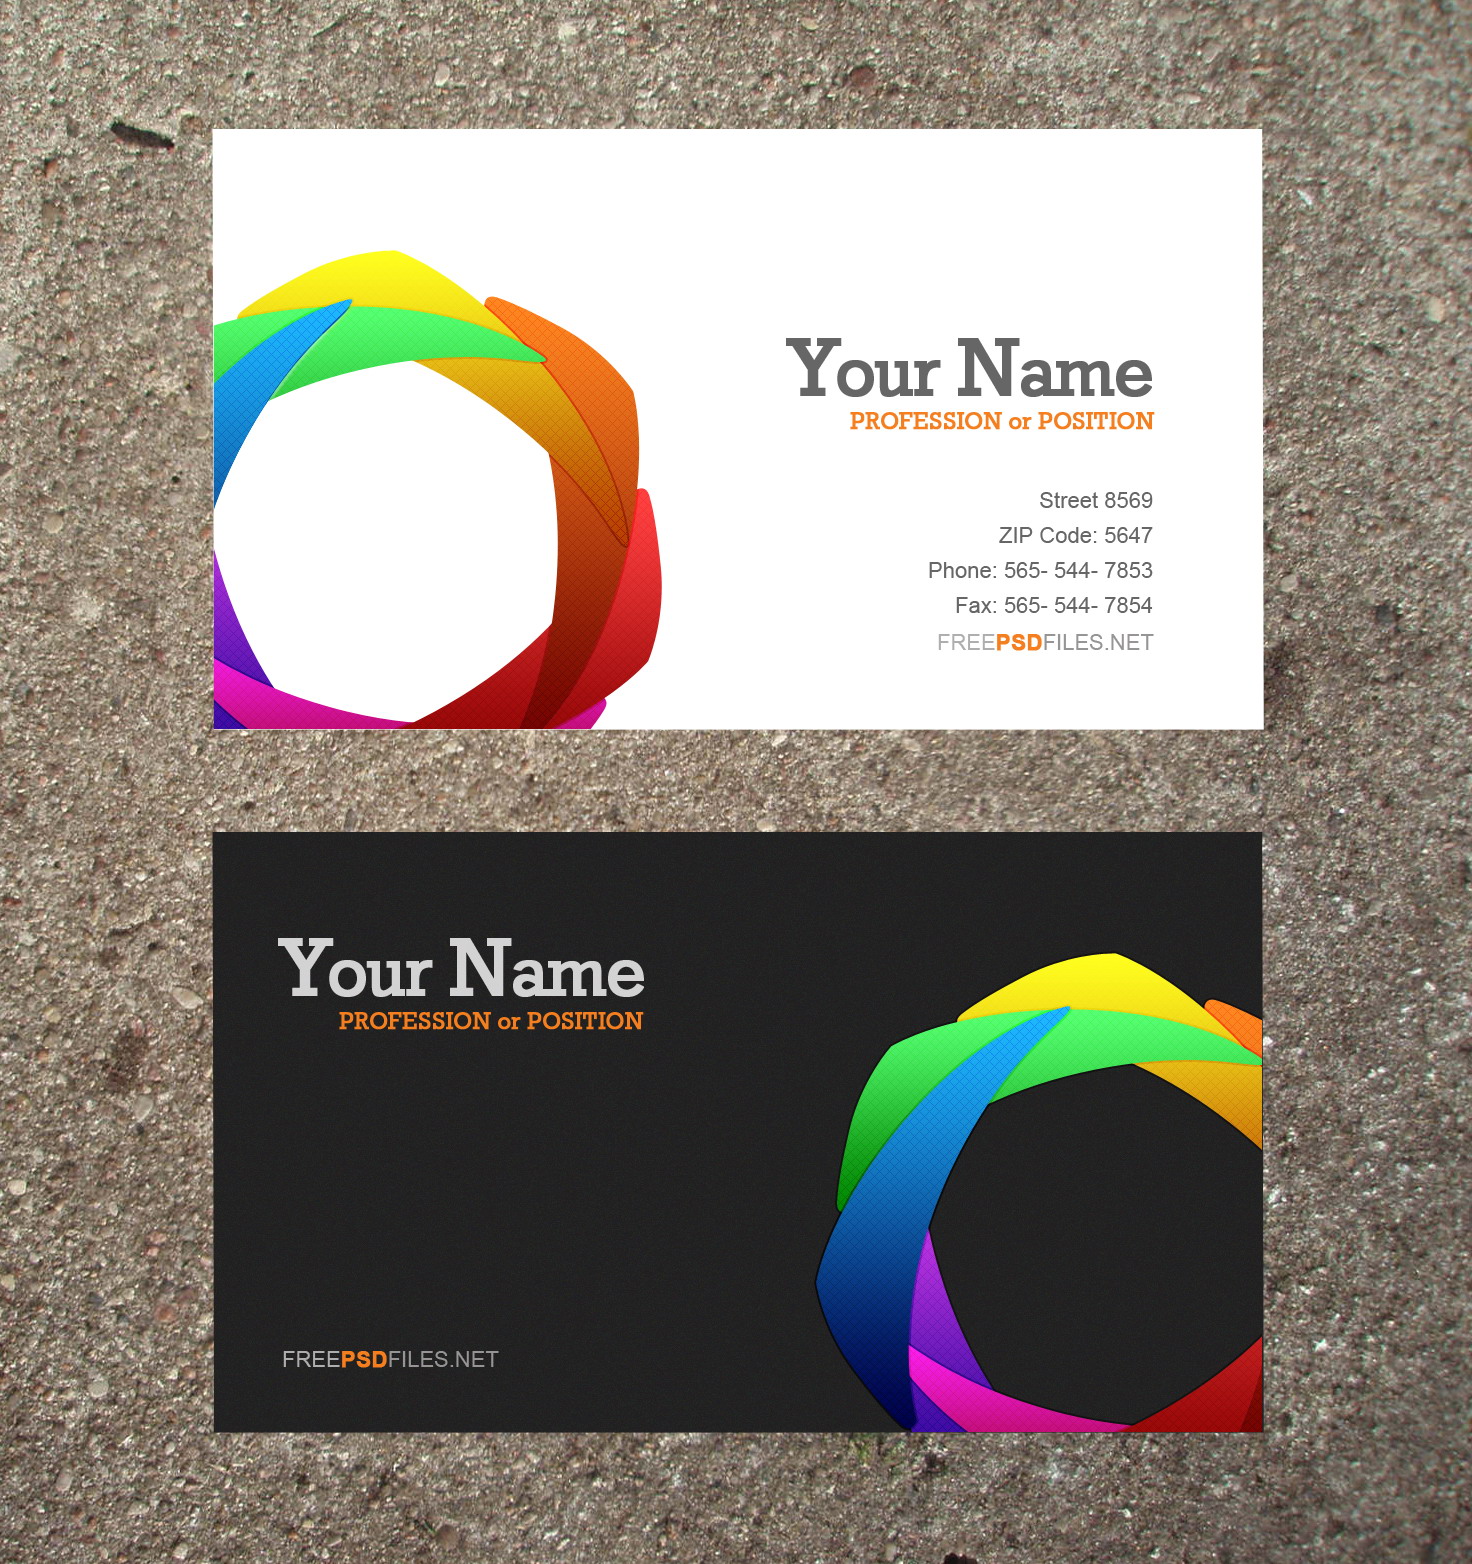 business card template jpg free download